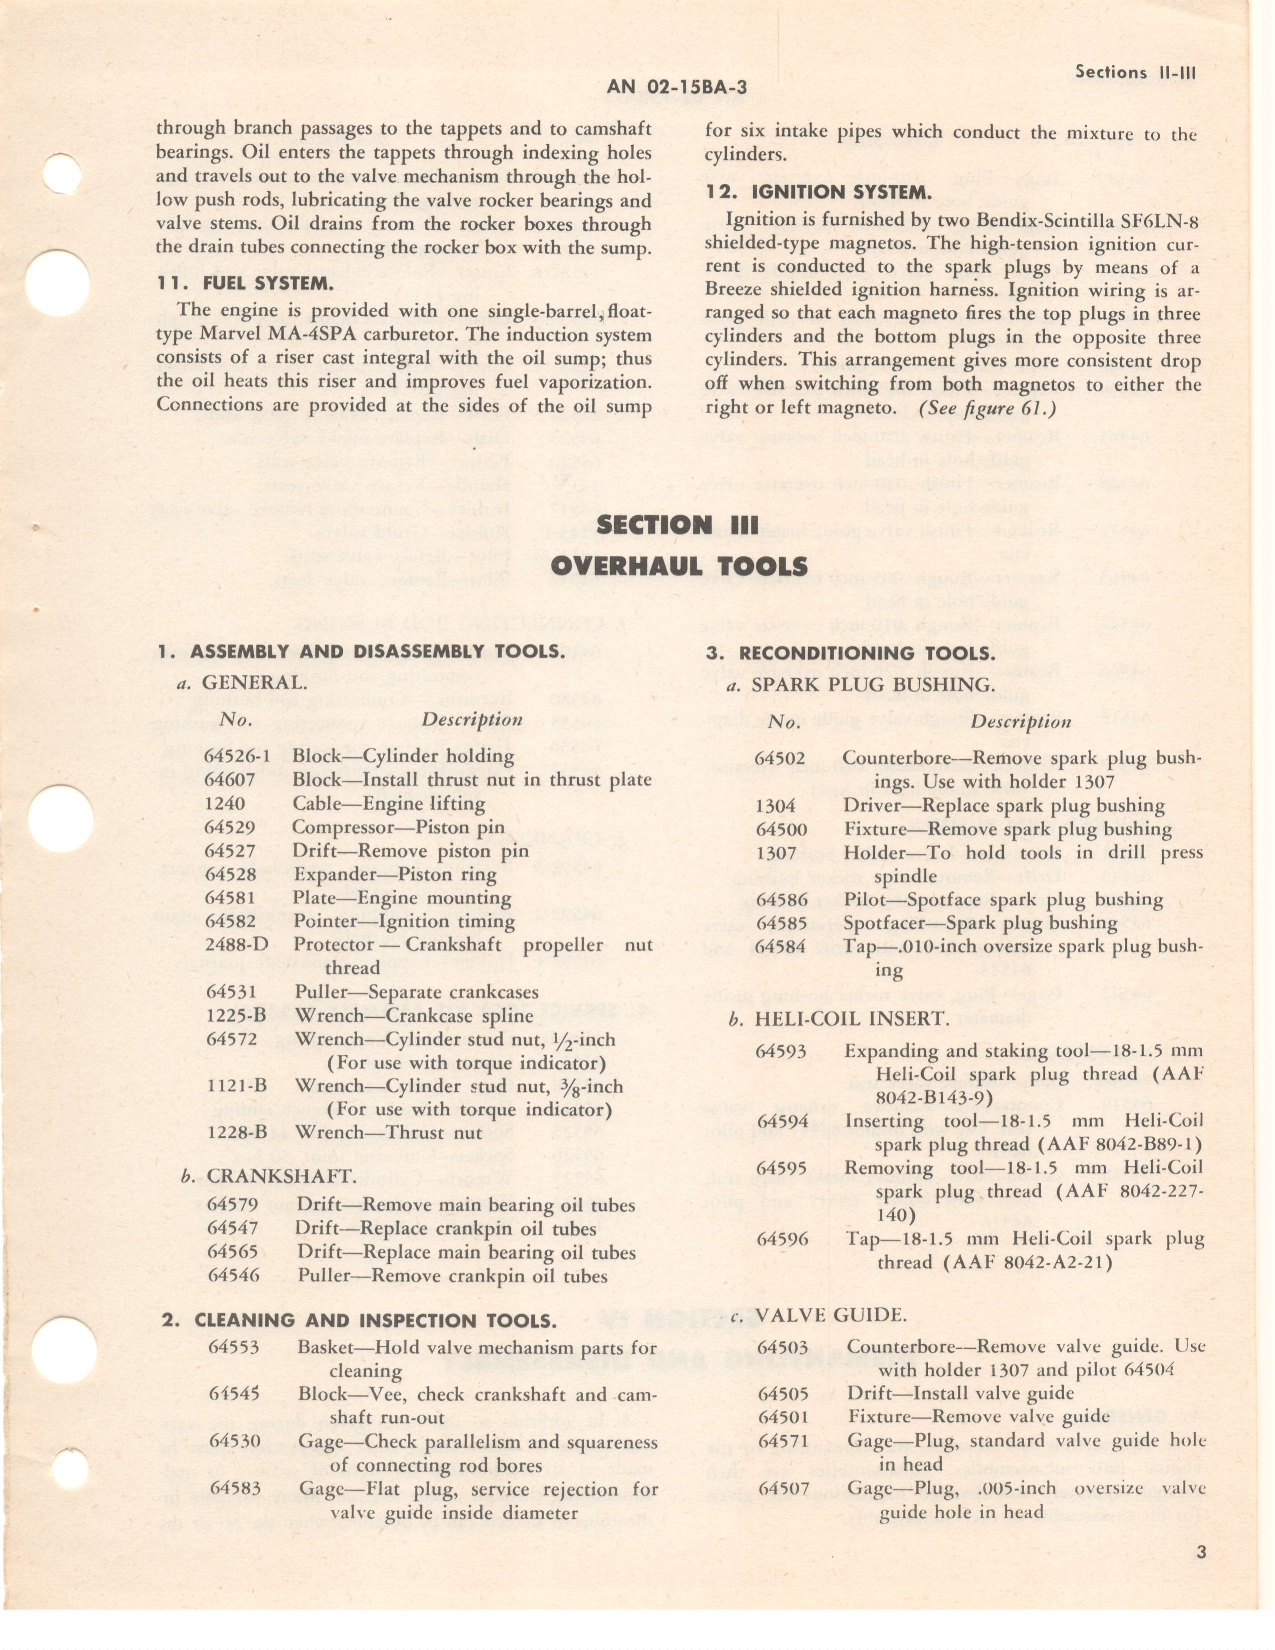 Sample page 9 from AirCorps Library document: Overhaul Instructions - O-435-1 Engines - 1951